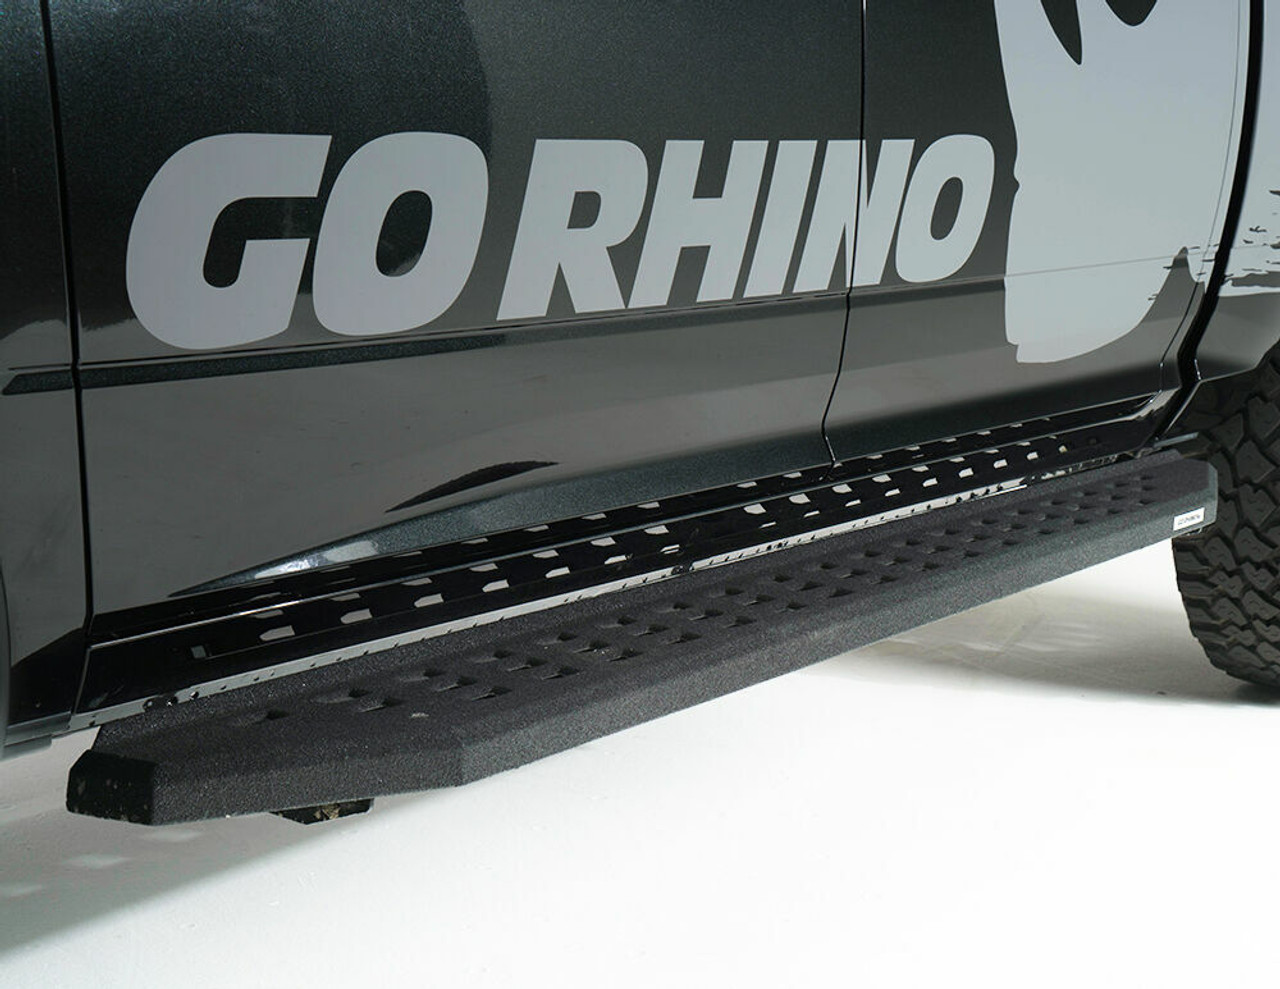 Go Rhino 6940478720T Chevrolet, Silverado 2500HD, 3500HD, 2015 - 2019, RB20 Running boards - Complete Kit: 2 pair RB20 Drop Steps, Galvanized Steel, Bedliner coating, 69400087T RB20 + 6940475 RB Brackets + (2) 69420000T Drop Step, Gasoline only